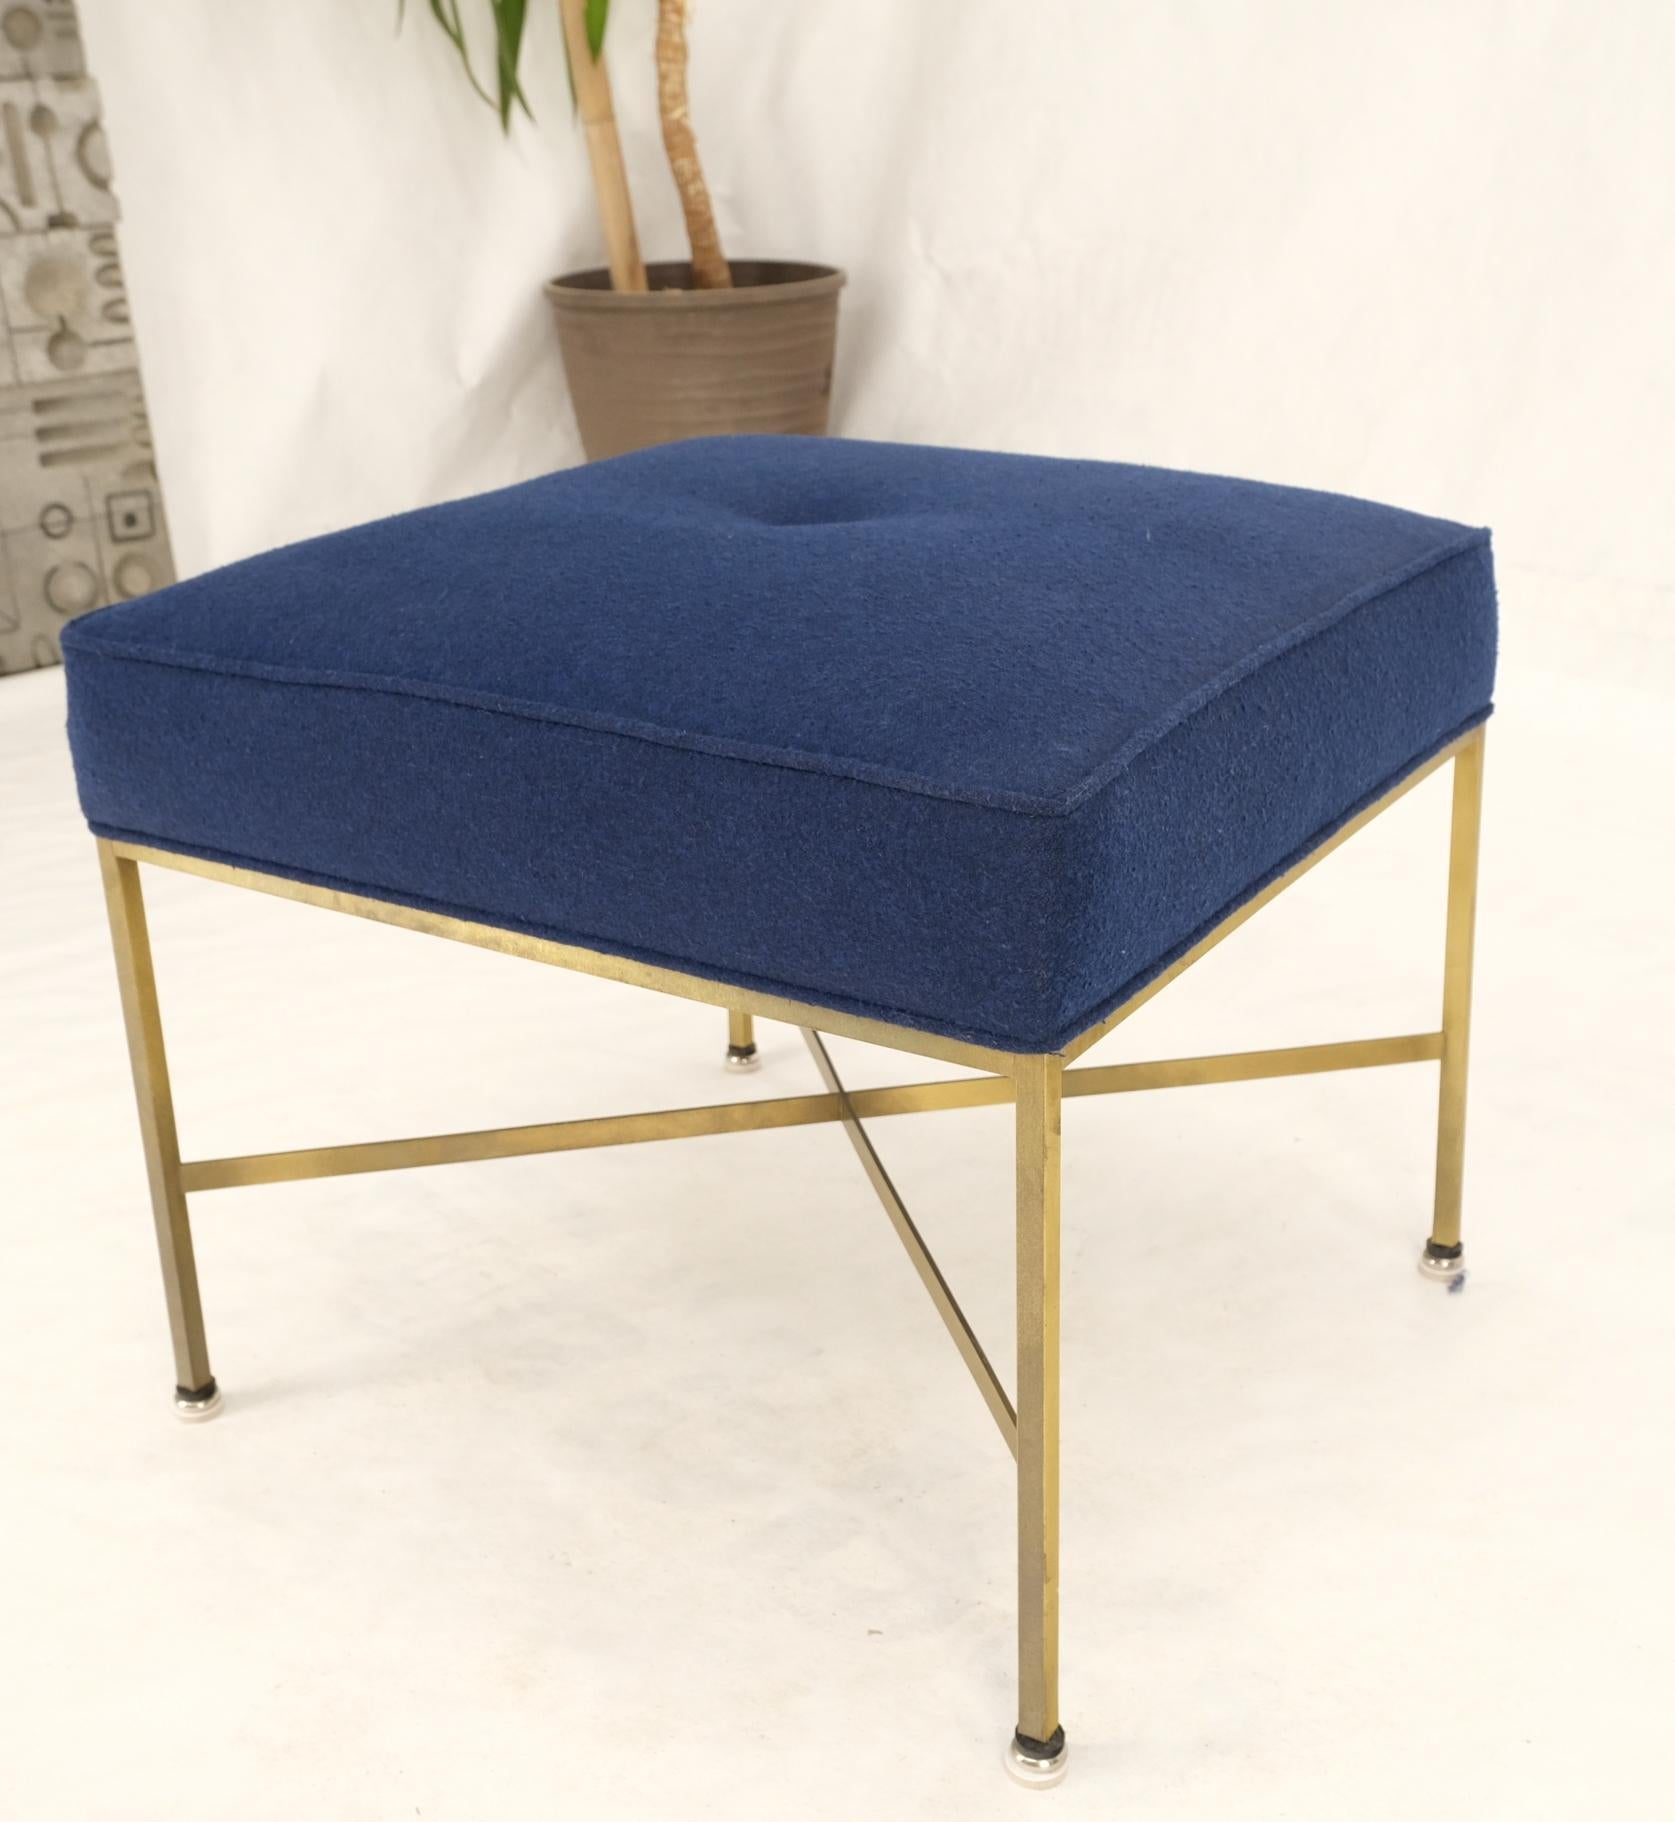 McCobb Square Brass Square Base New Navy Blue Upholstery Bench Stool For Sale 2